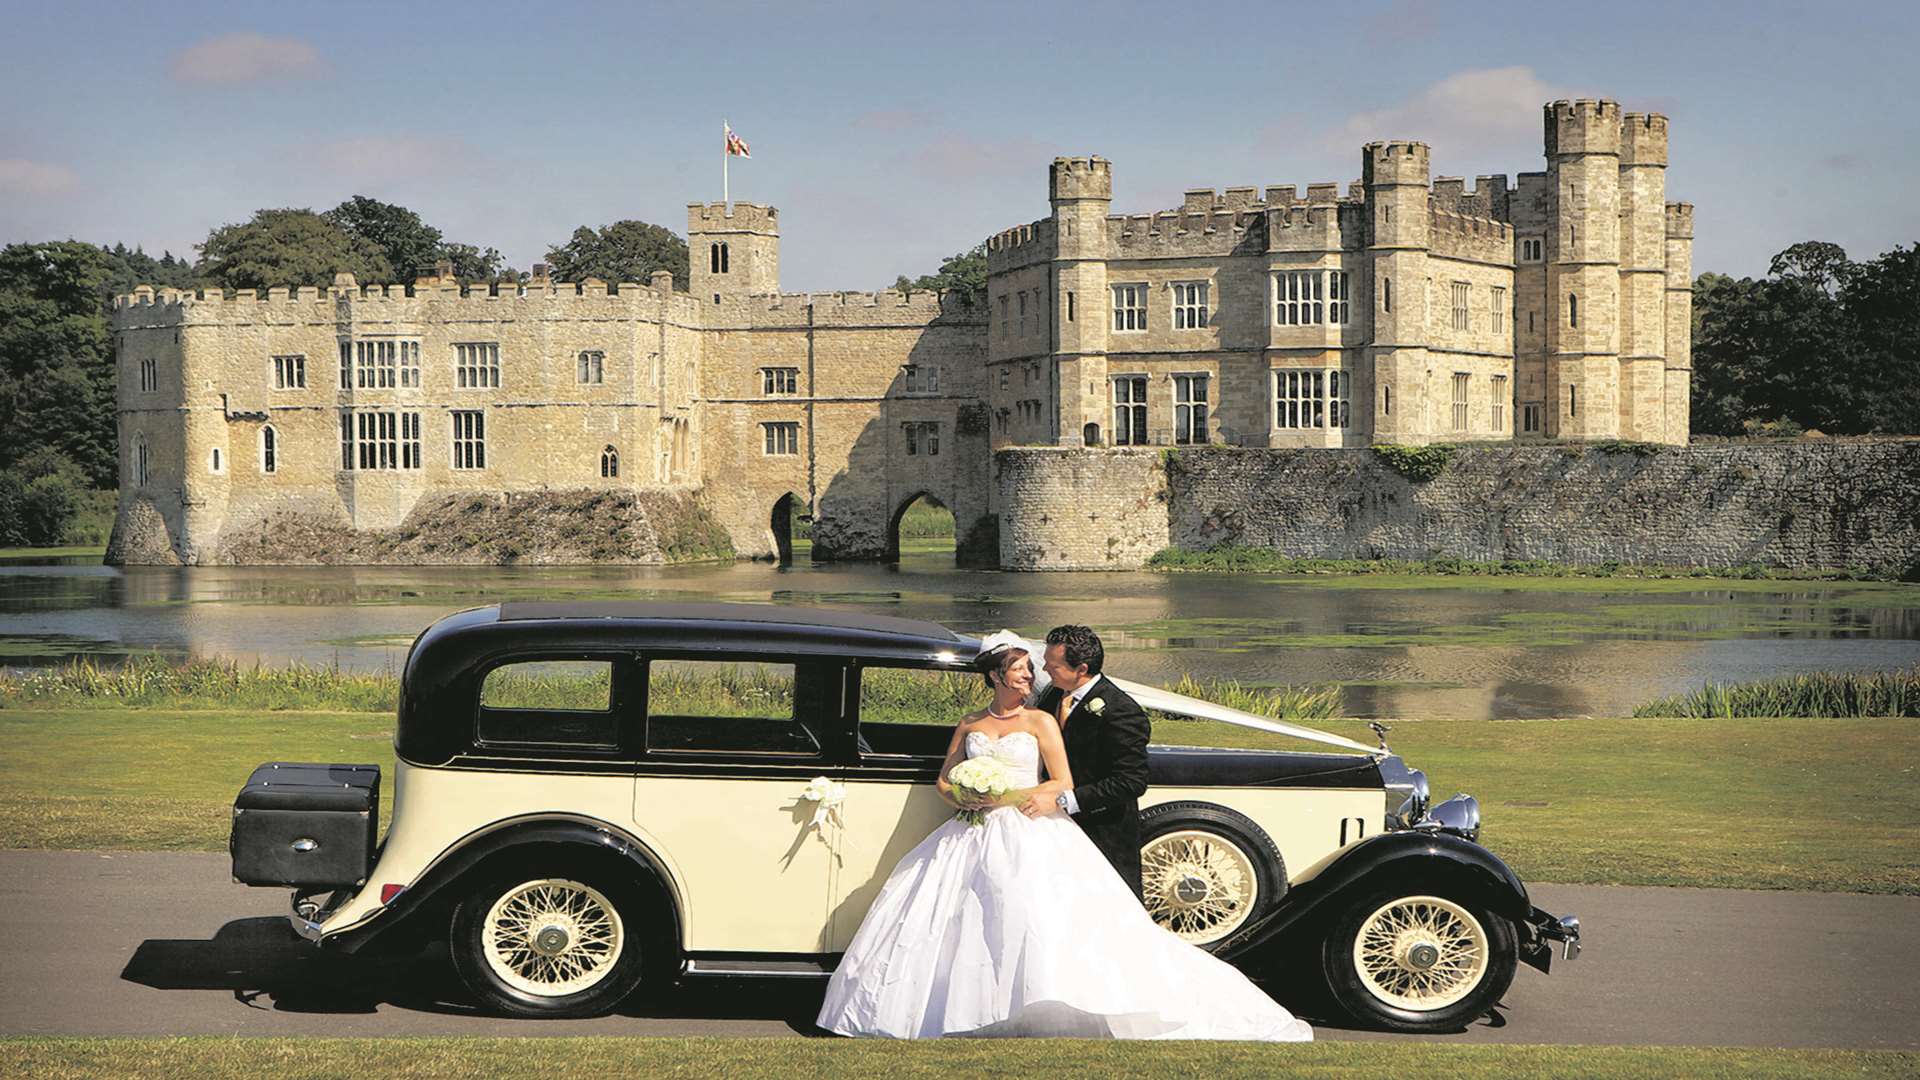 Tying the knot at Leeds Castle